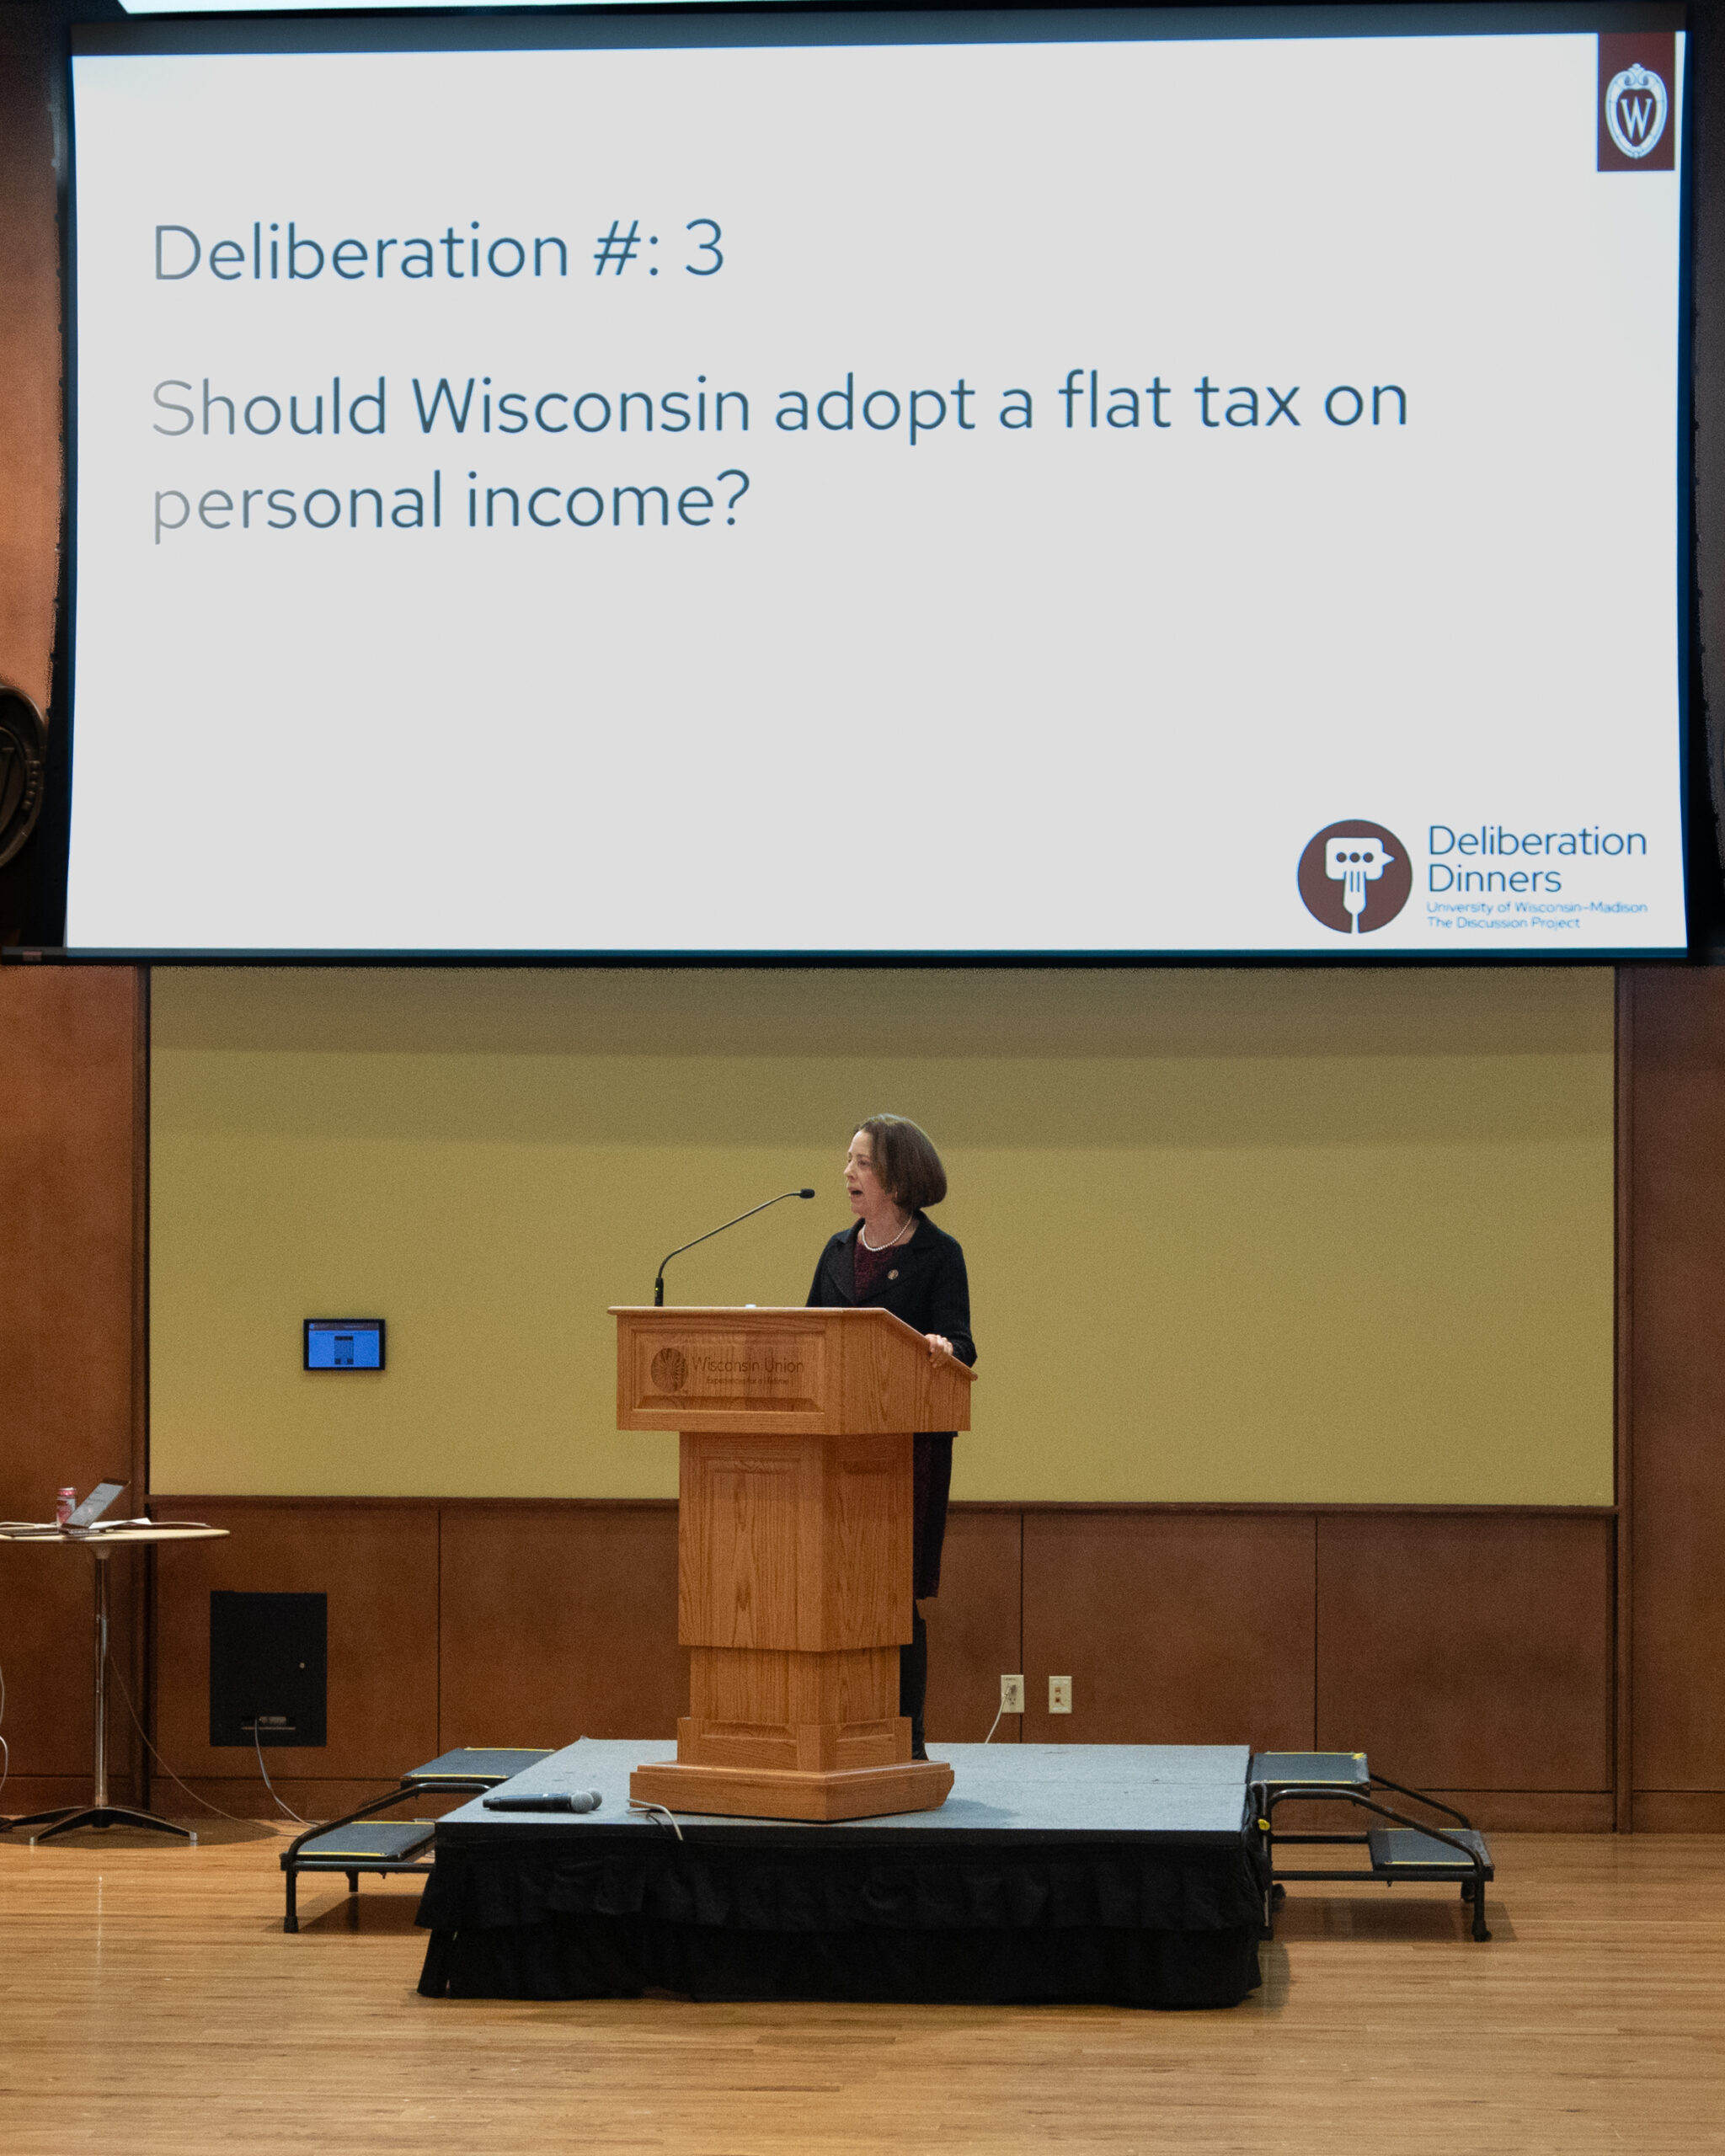 Dean Hess at a podium on stage with a projected slide that says Deliberation number 3: Should Wisconsin adopt a flat tax on personal income?